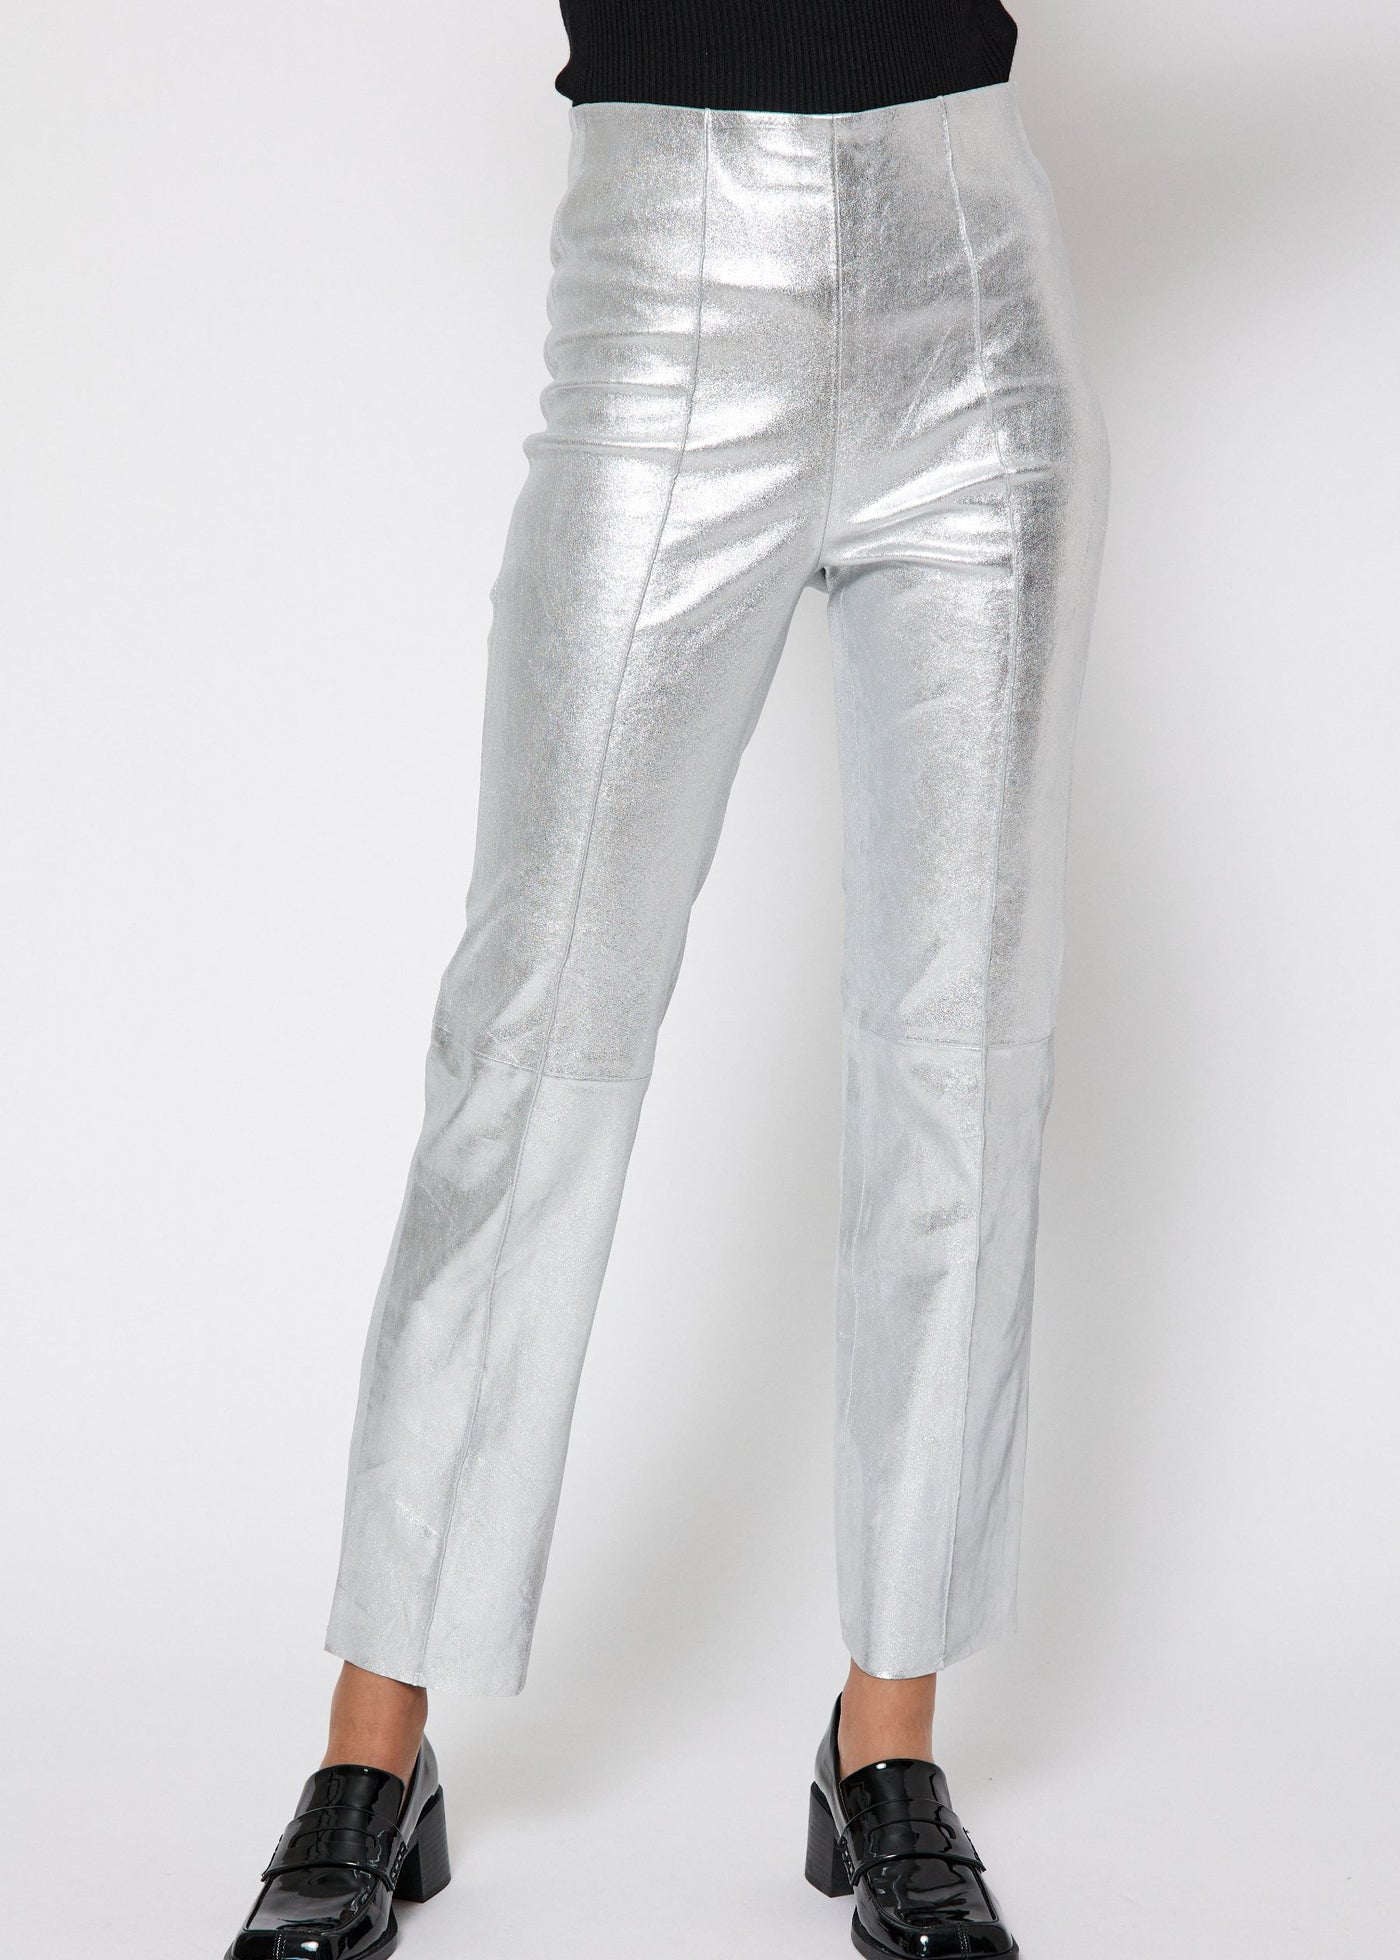 These leggings are made of soft, stretchy silver lamb leather from the Danish  brand NORR